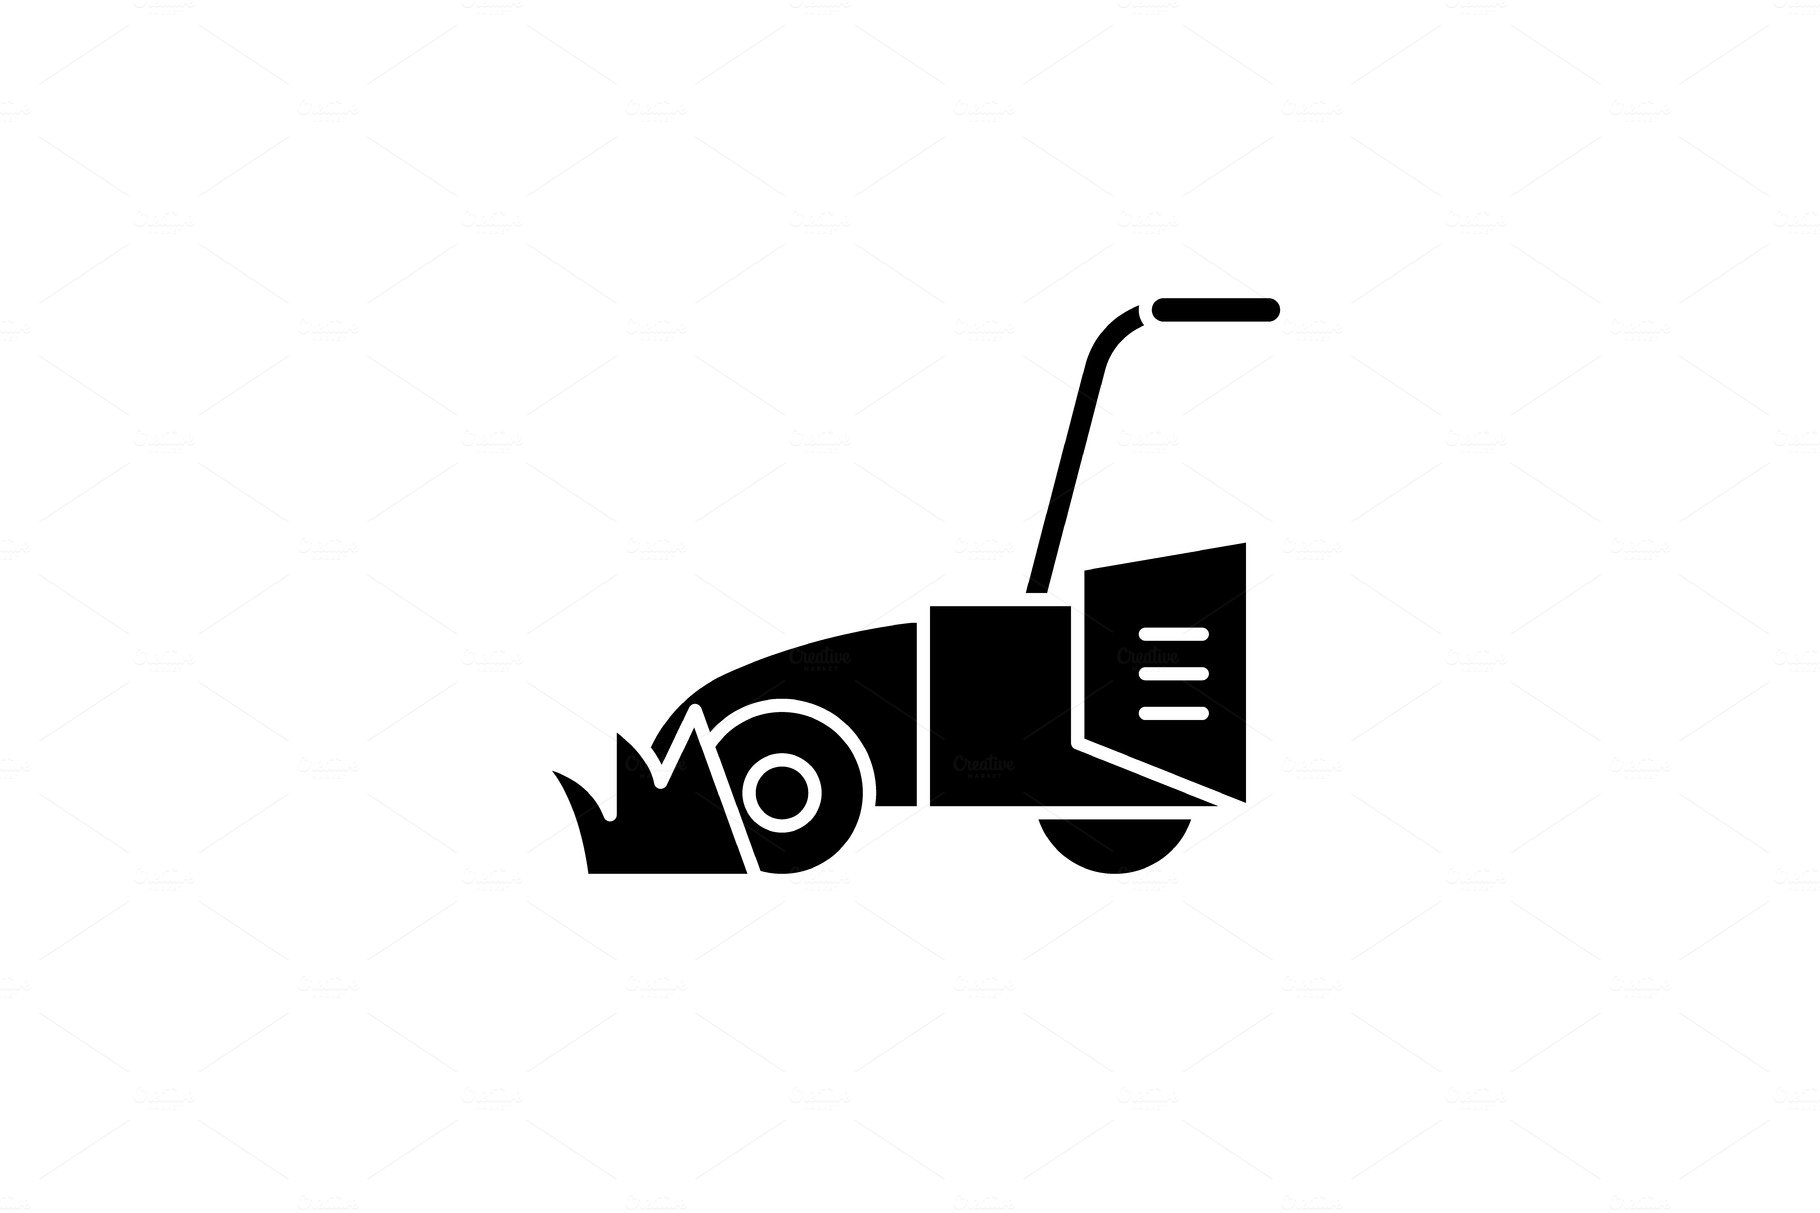 Lawn mower black icon, vector sign cover image.